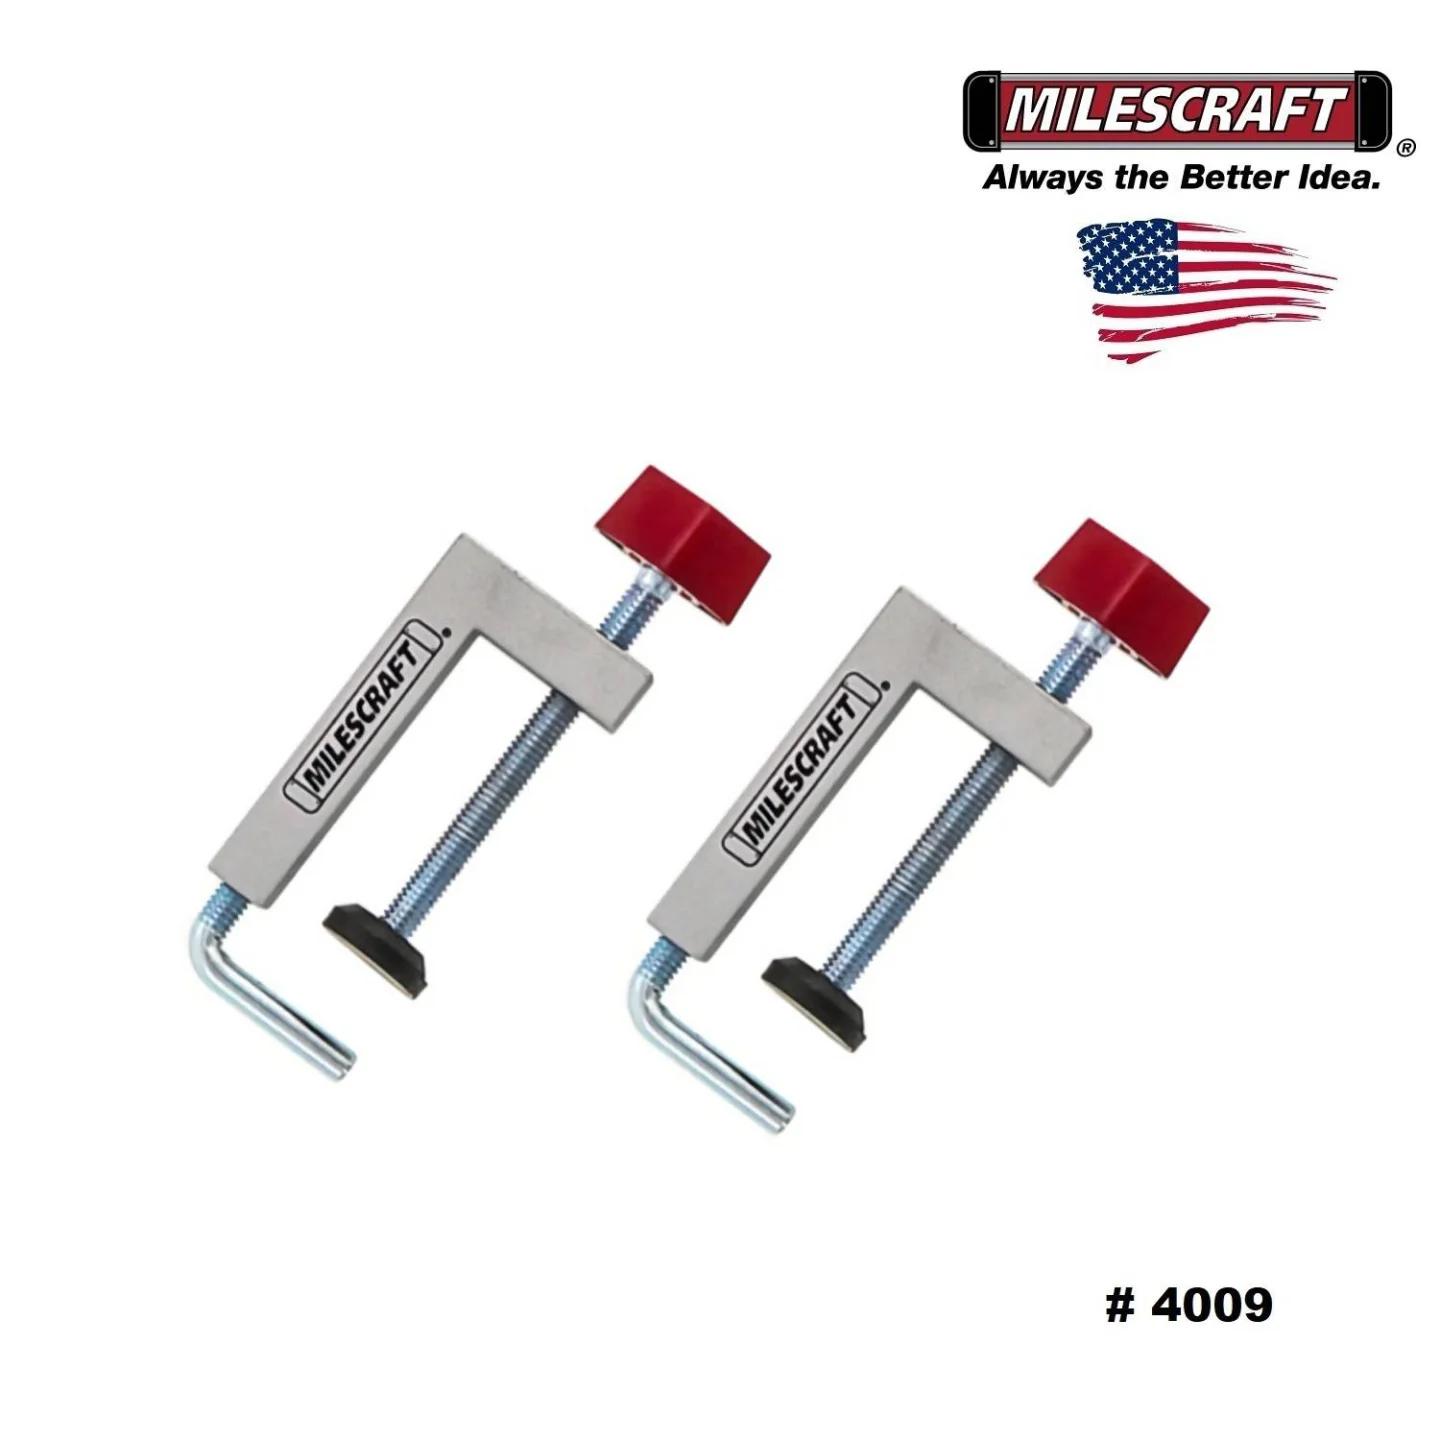 fence-clamps-Milescraft-4009.